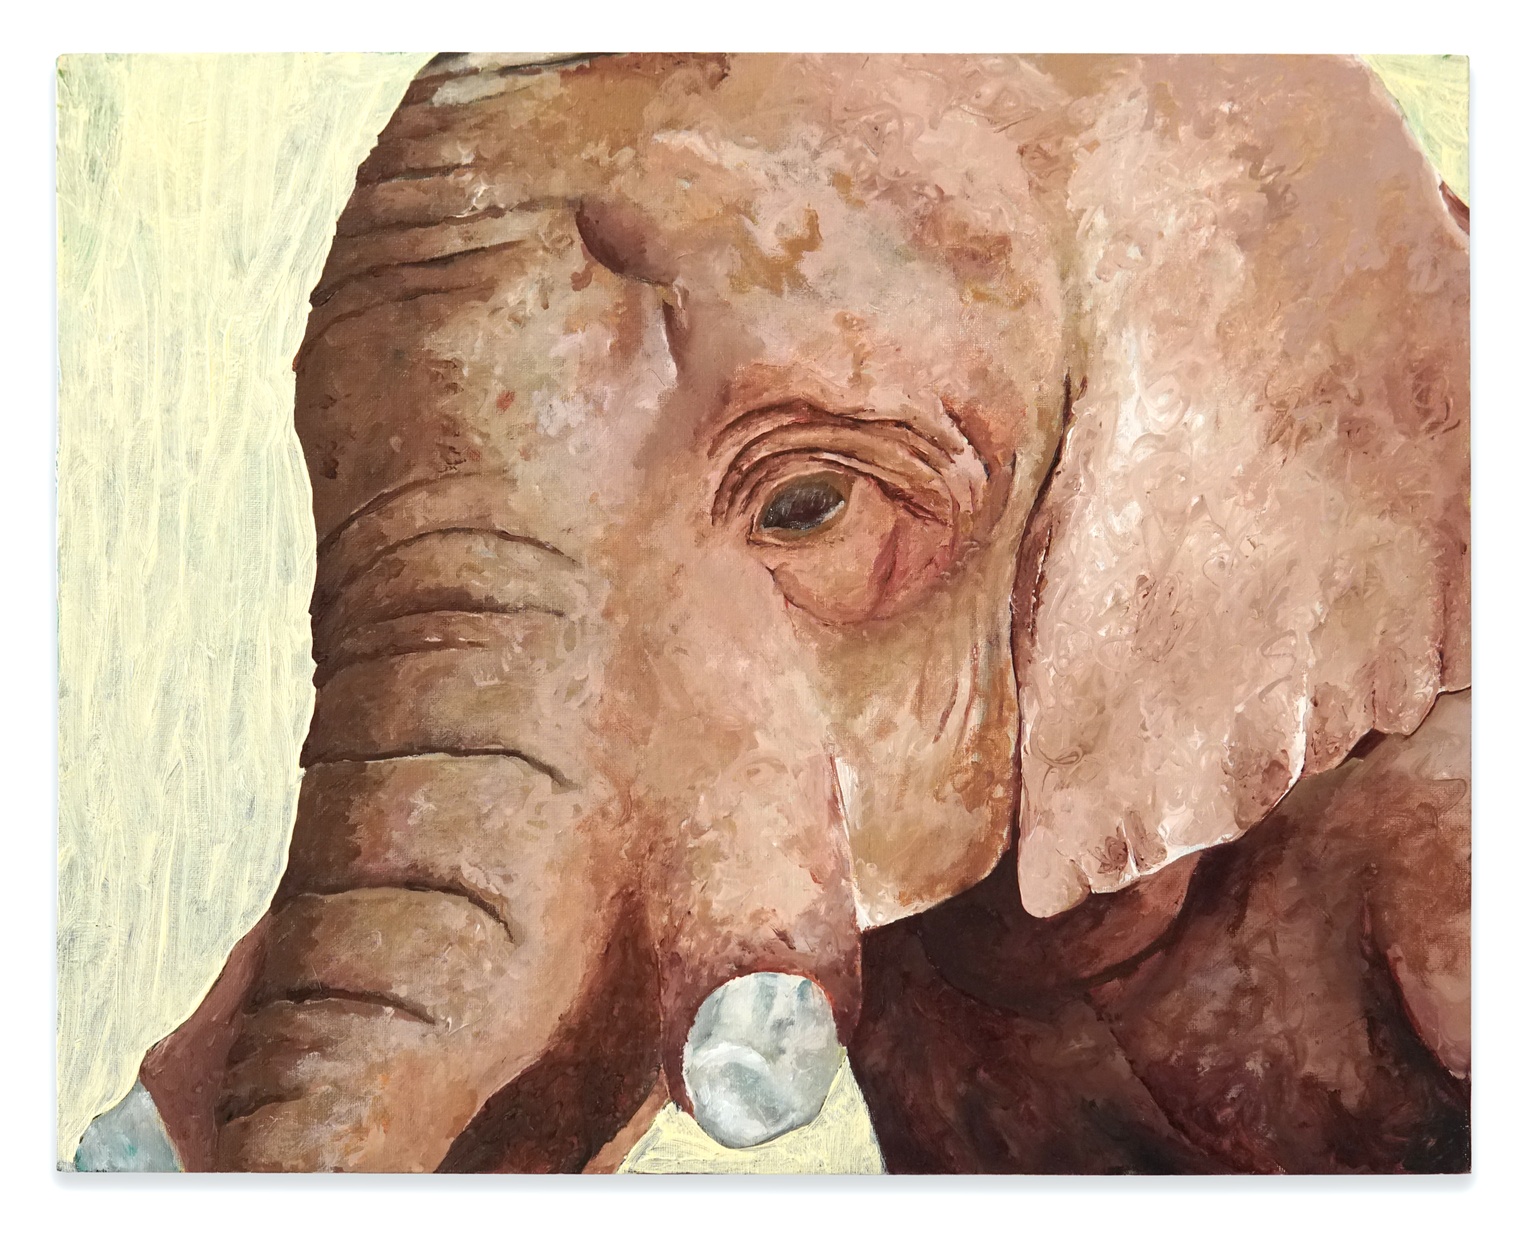 A close-up painting of an elephant's head with broken tusks on a light yellow background.